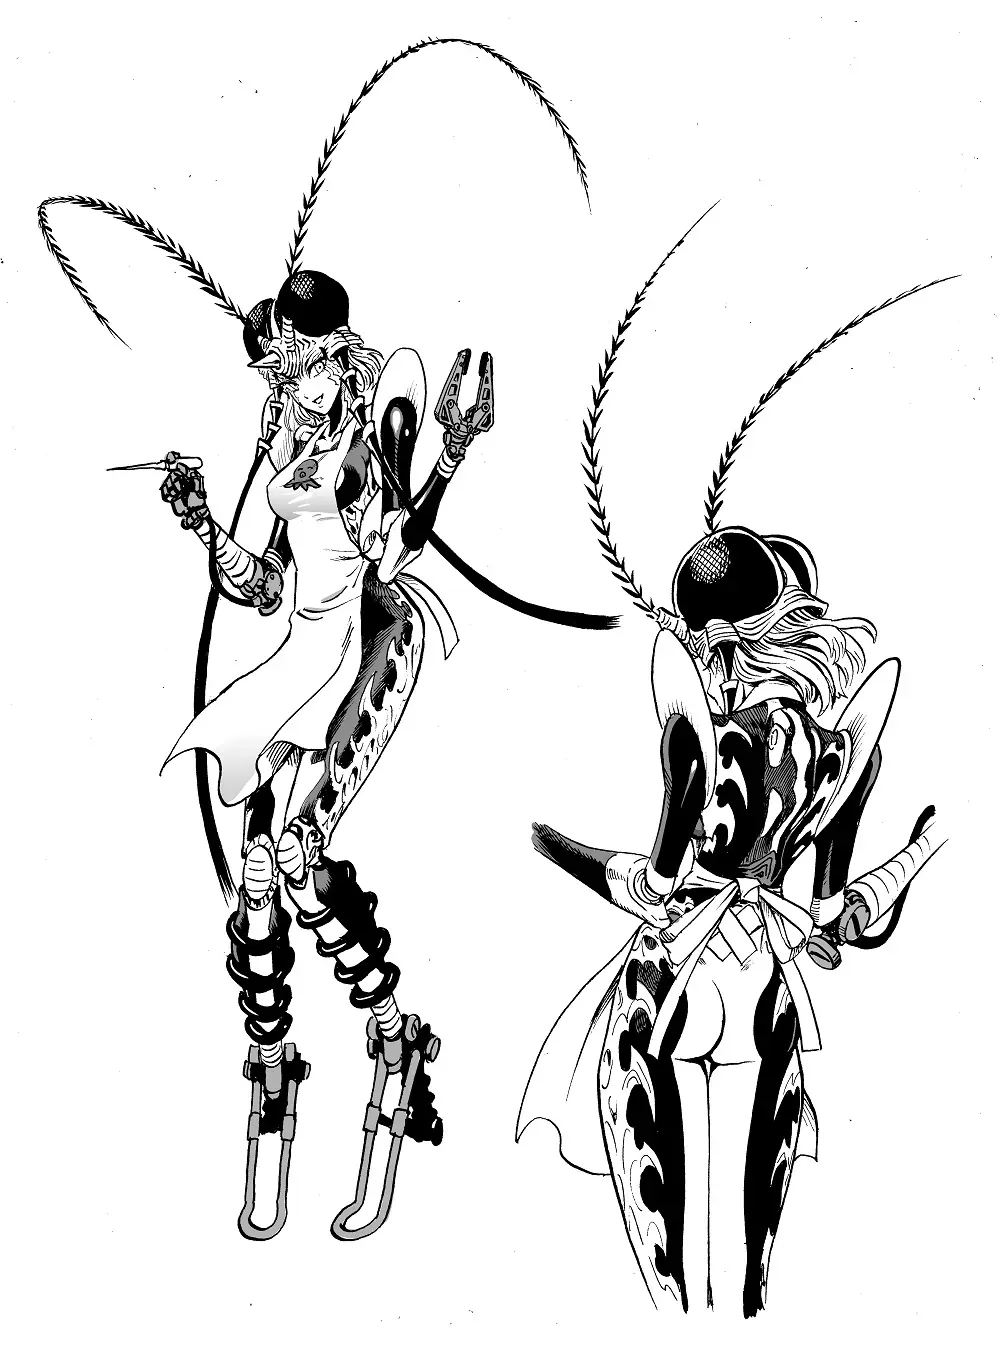 Murata Revived Mosquito Girl Just to Draw Another Beautiful Woman